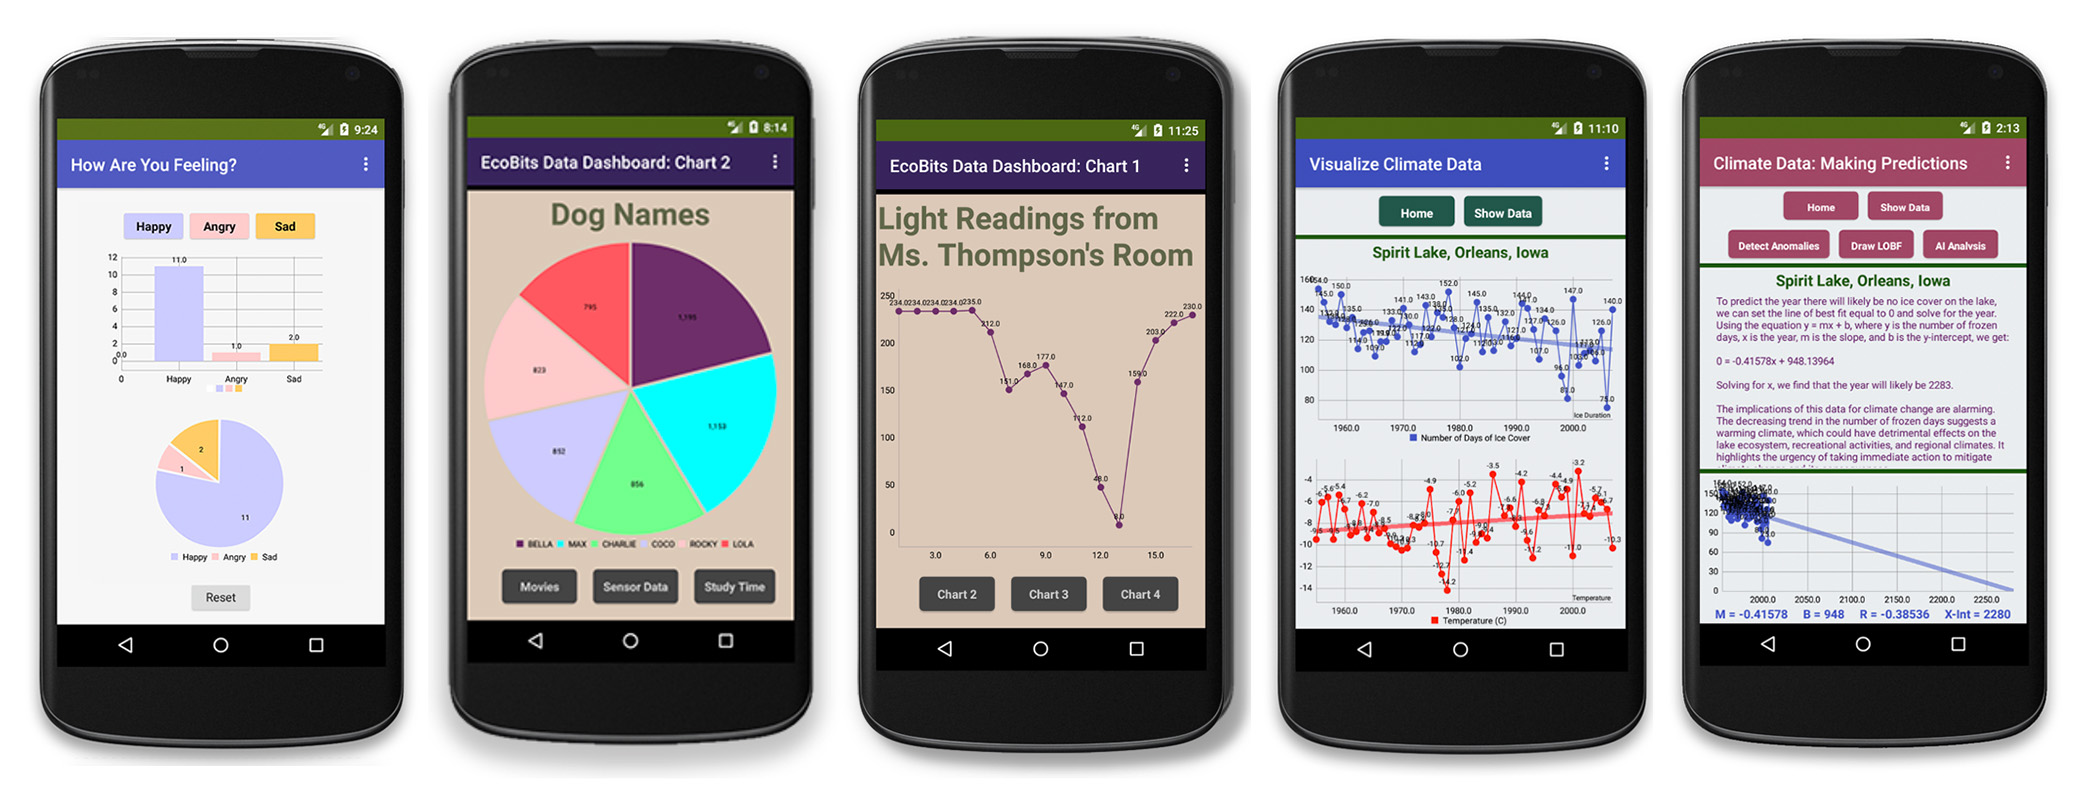 App Inventor can help you create apps to do surveys, collect sensor data, and analyze spreadsheet data.